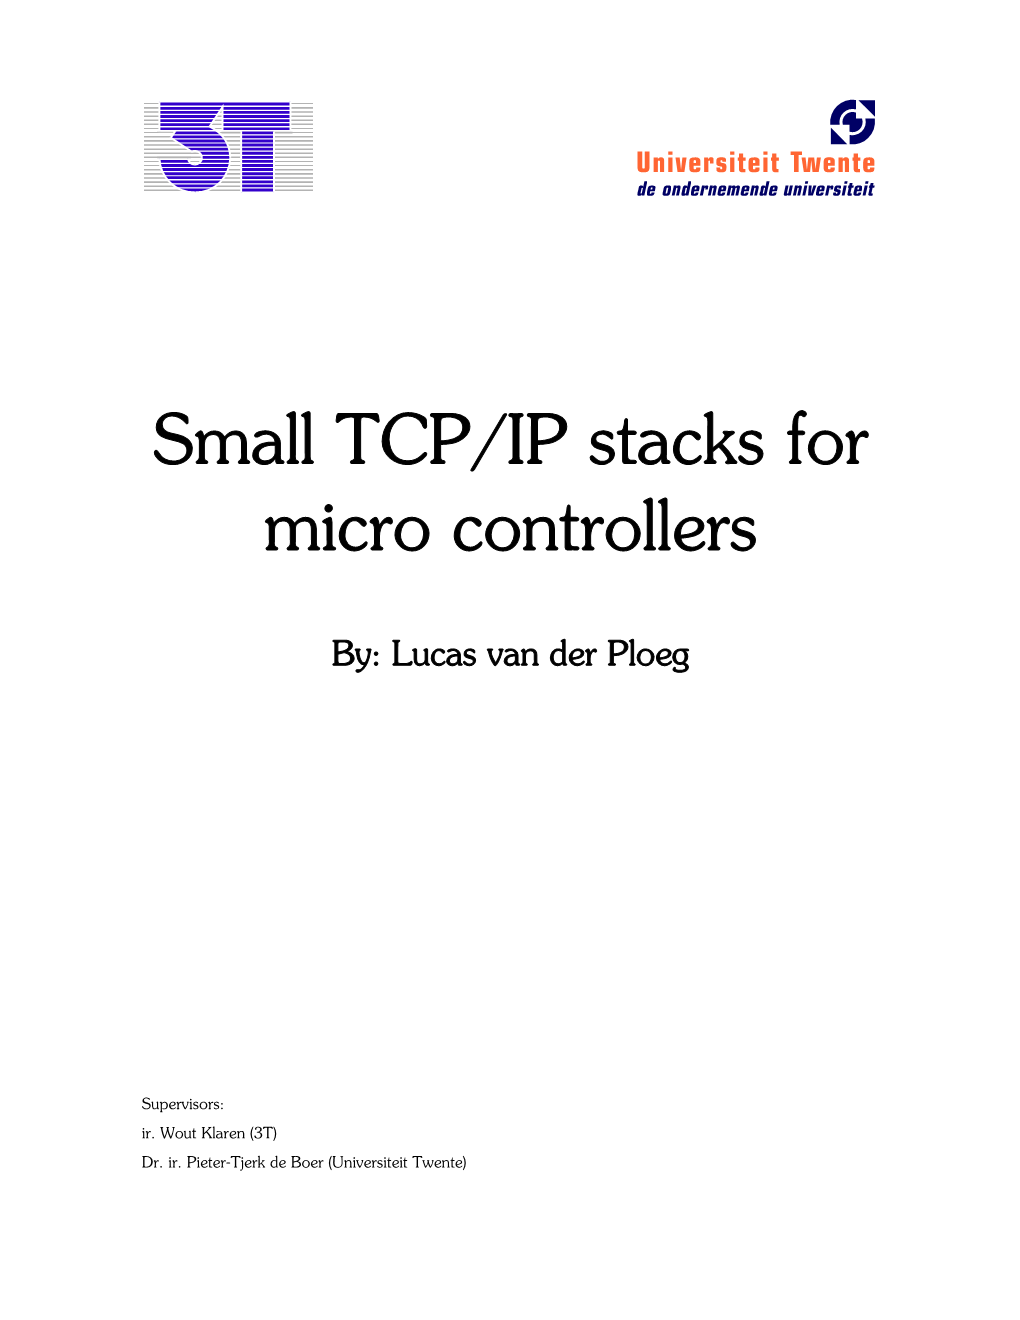 Small TCP/IP Stacks for Micro Controllers